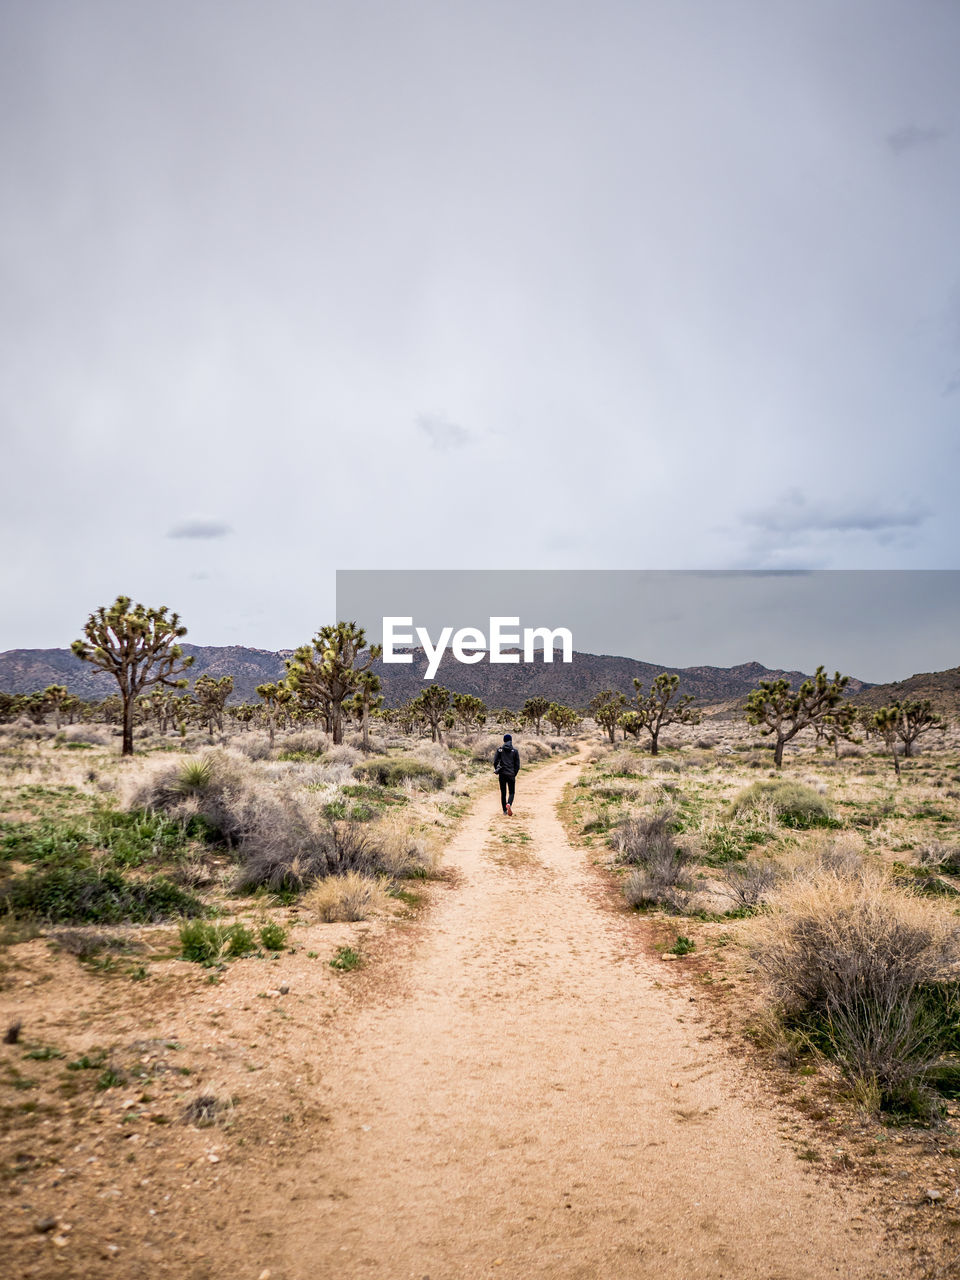 Man heading down path surrounded by joshua trees in desert